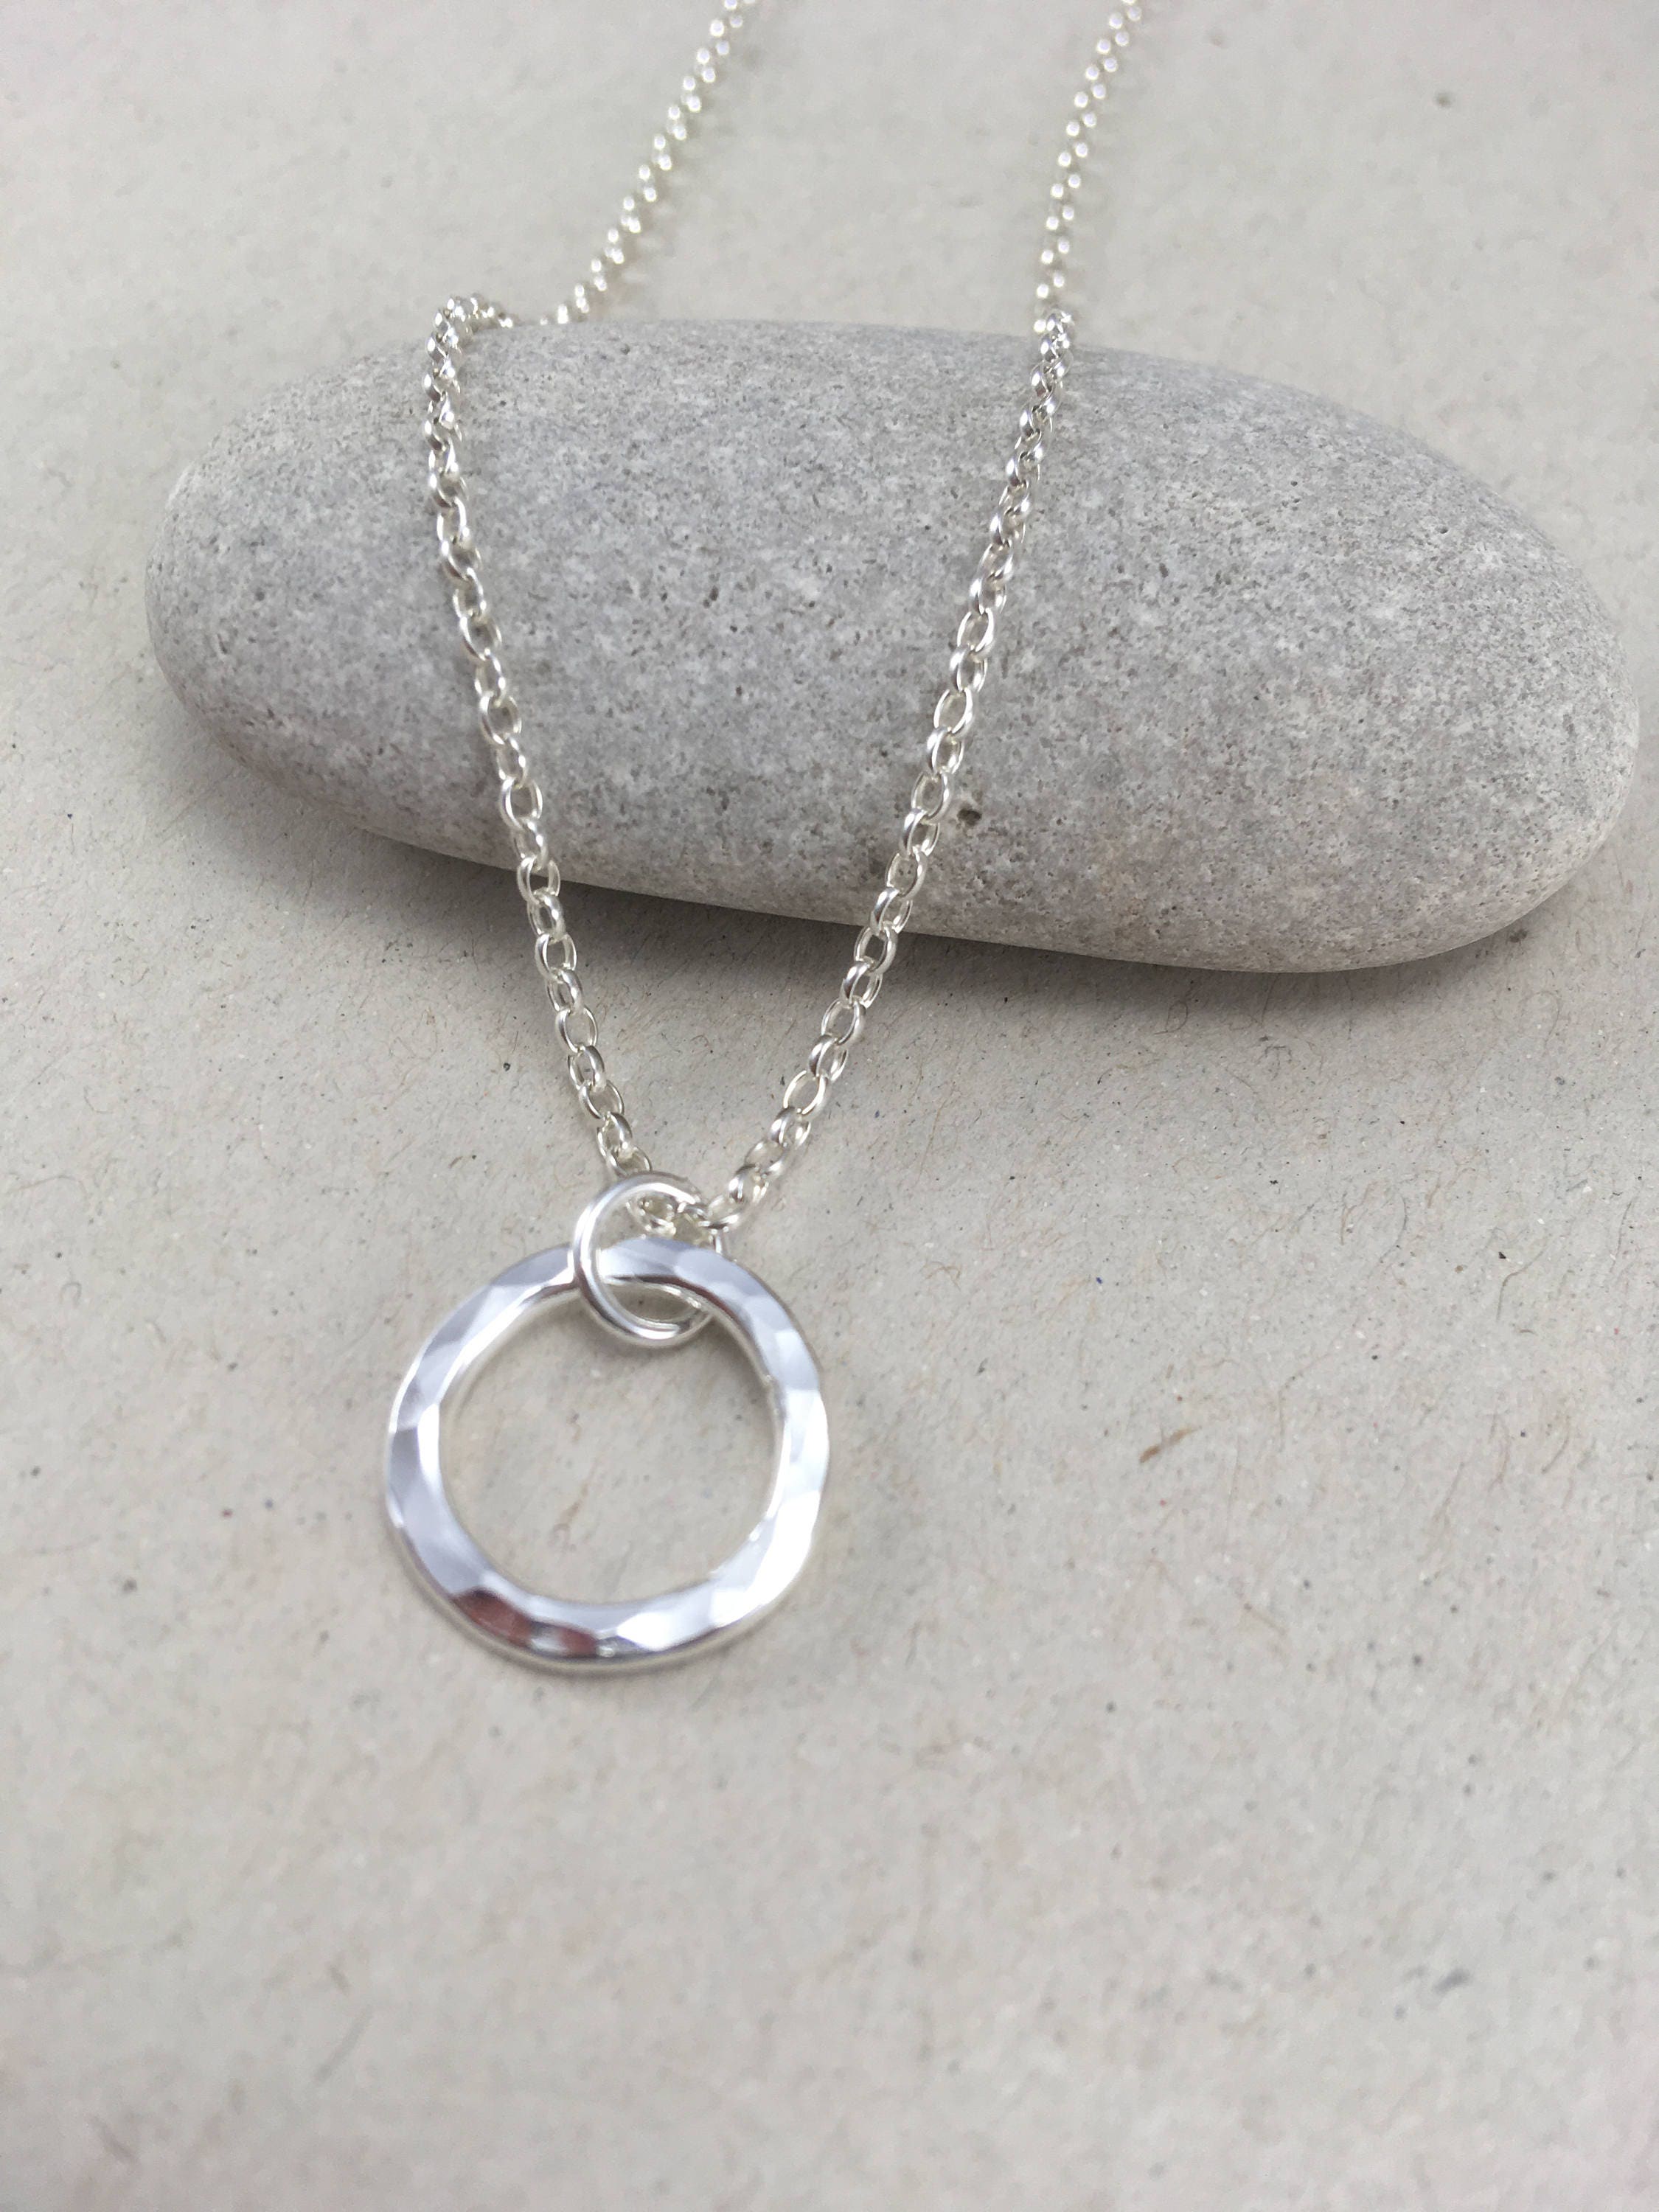 Amazon.com: Hammered Silver Necklace with Spiral Pendant : Handmade Products